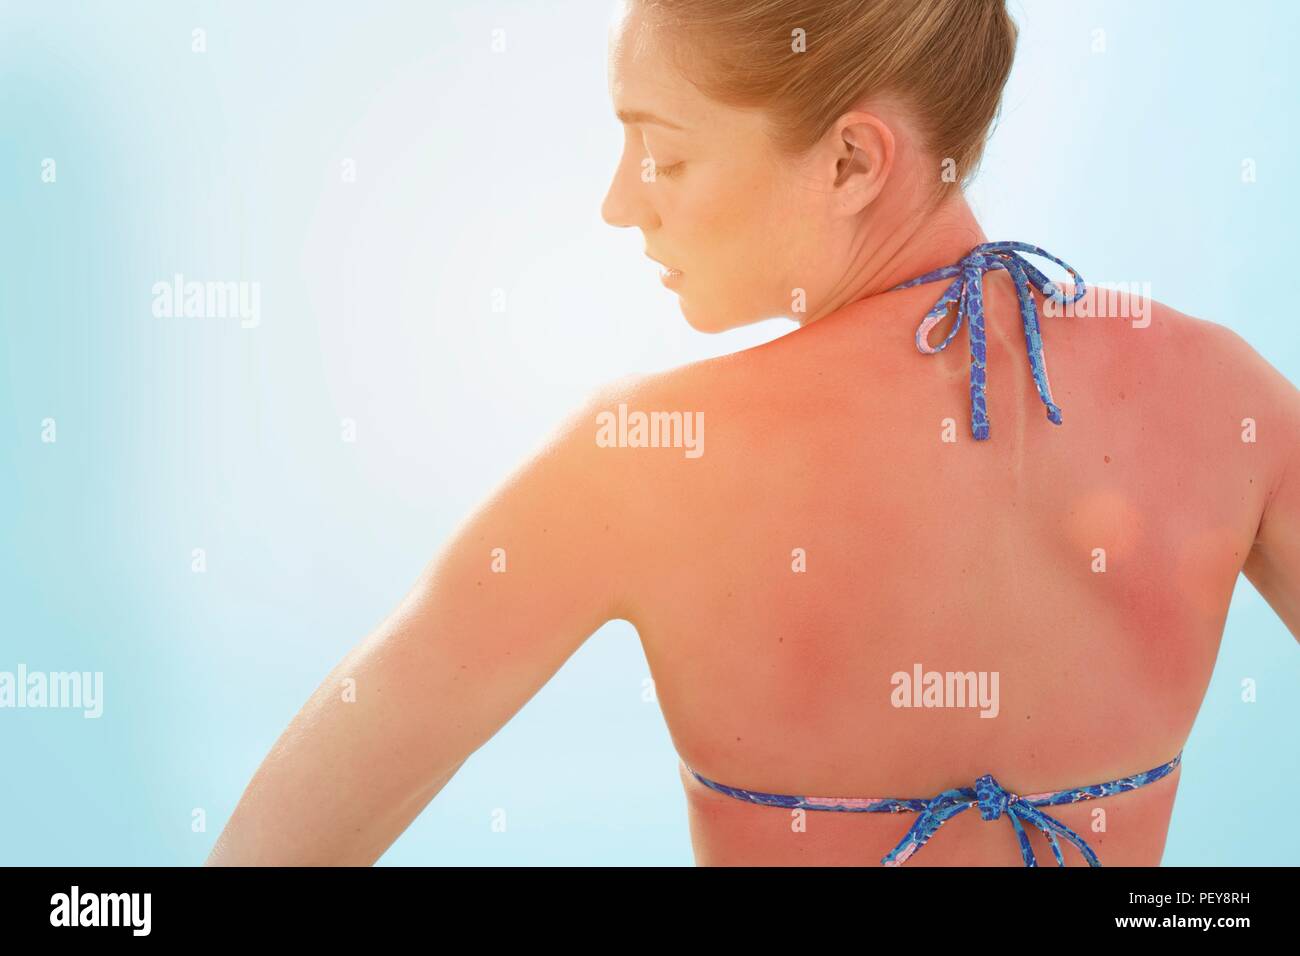 Woman with sunburnt back, rear view. Stock Photo